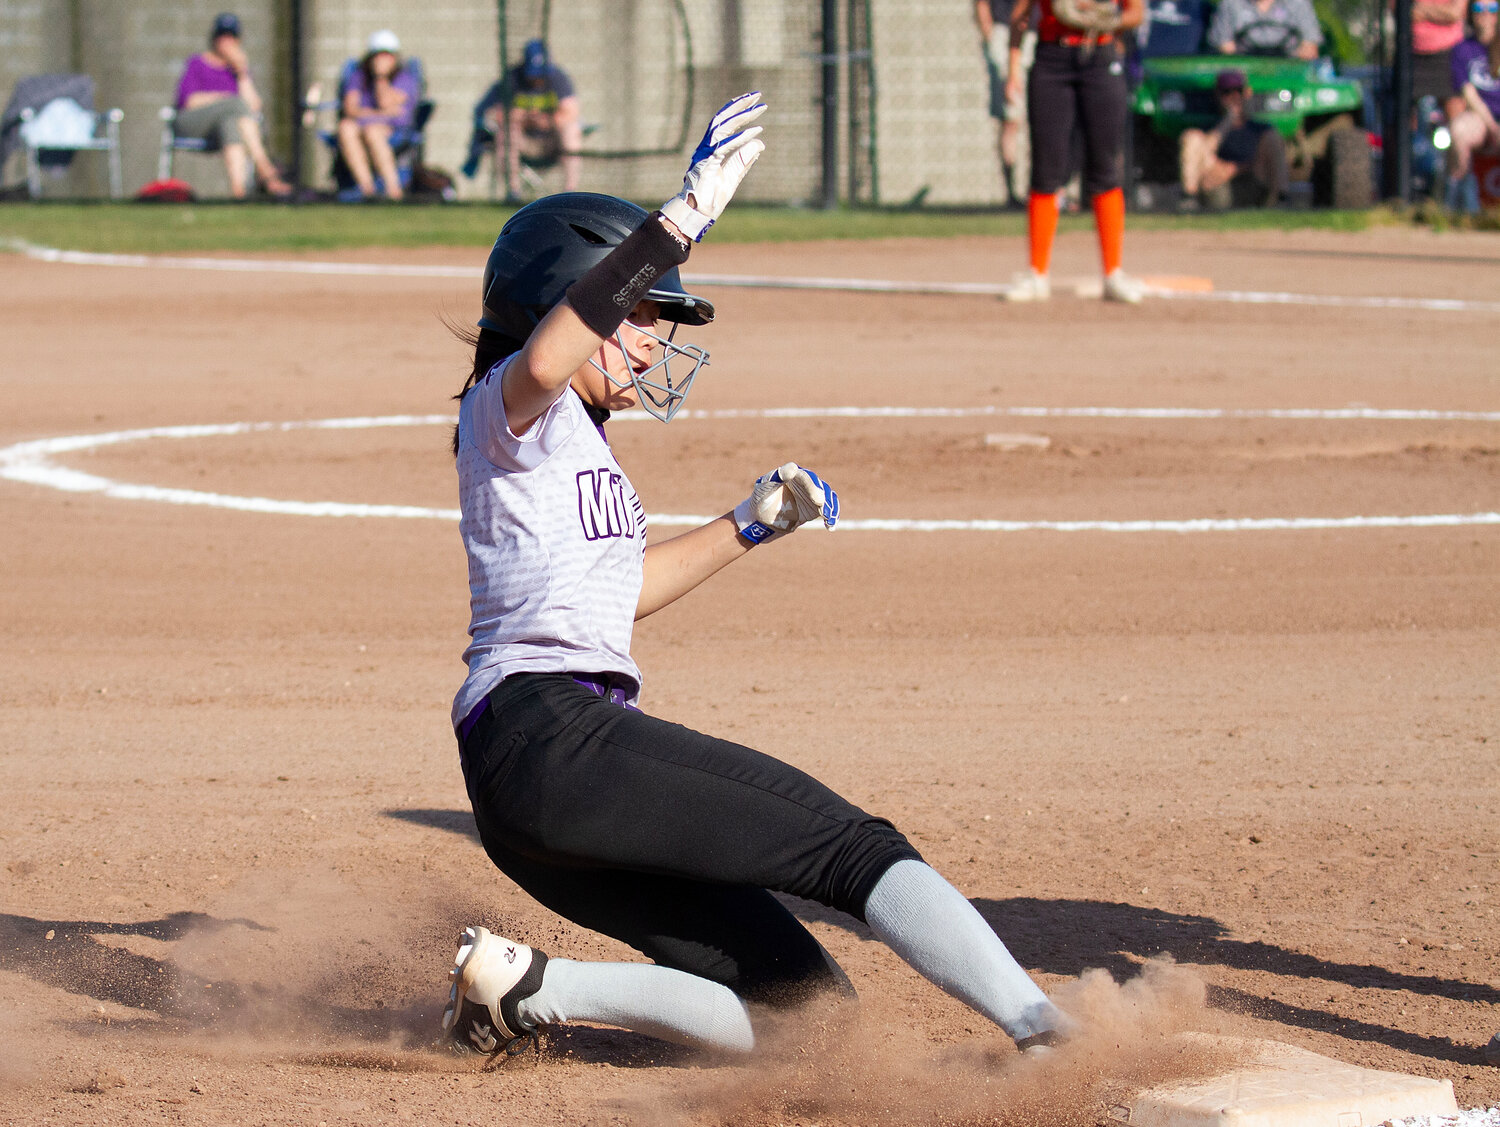 Elsa White slides safely into third base in the first inning. She later scored on Reily Amaral's base hit.